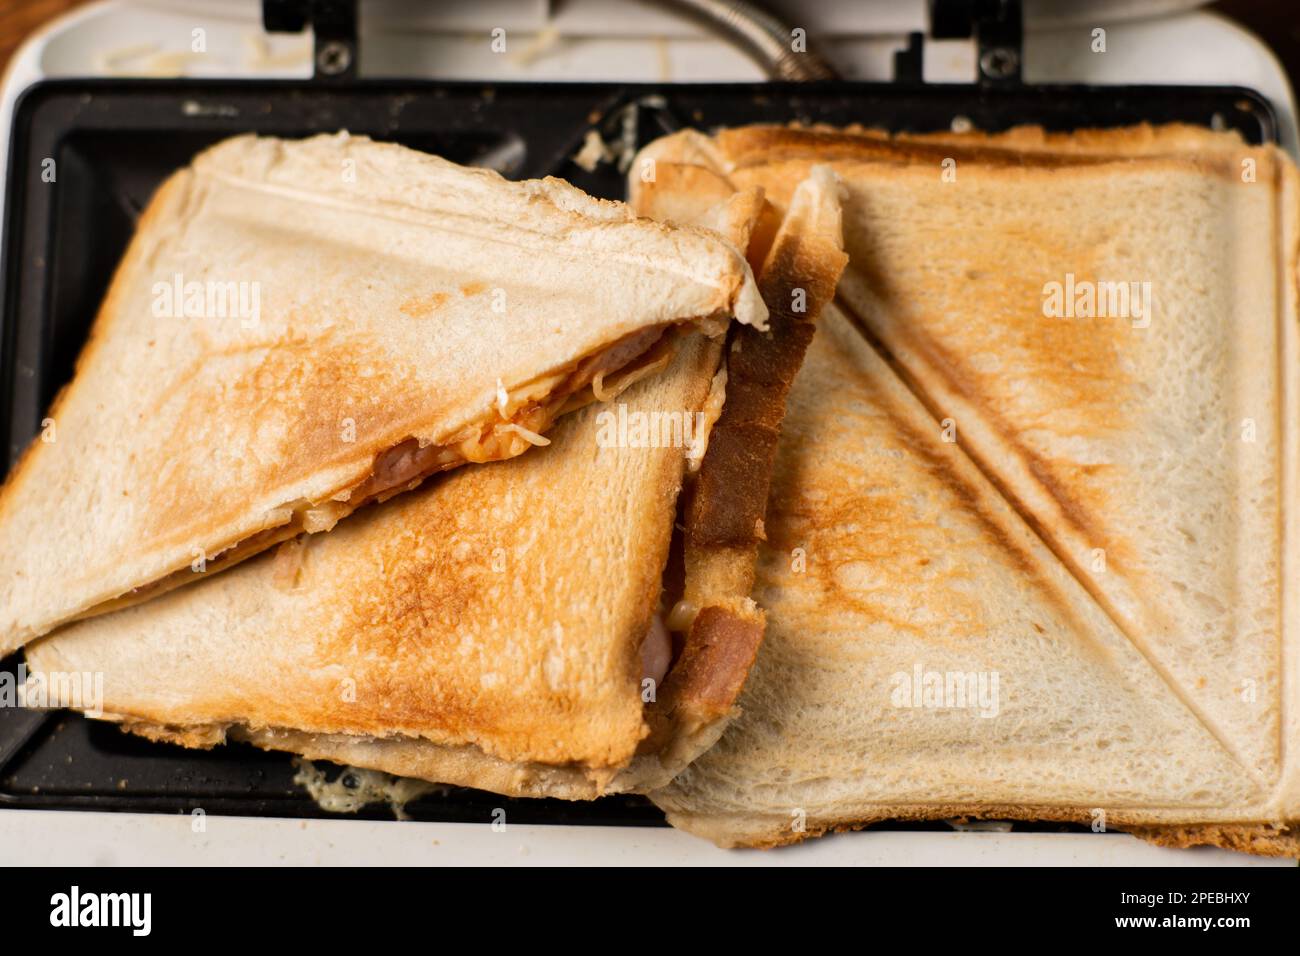 https://c8.alamy.com/comp/2PEBHXY/freshly-made-toasted-sandwiches-in-a-sandwich-maker-on-a-wooden-background-toasted-triangular-sandwiches-with-cheese-2PEBHXY.jpg